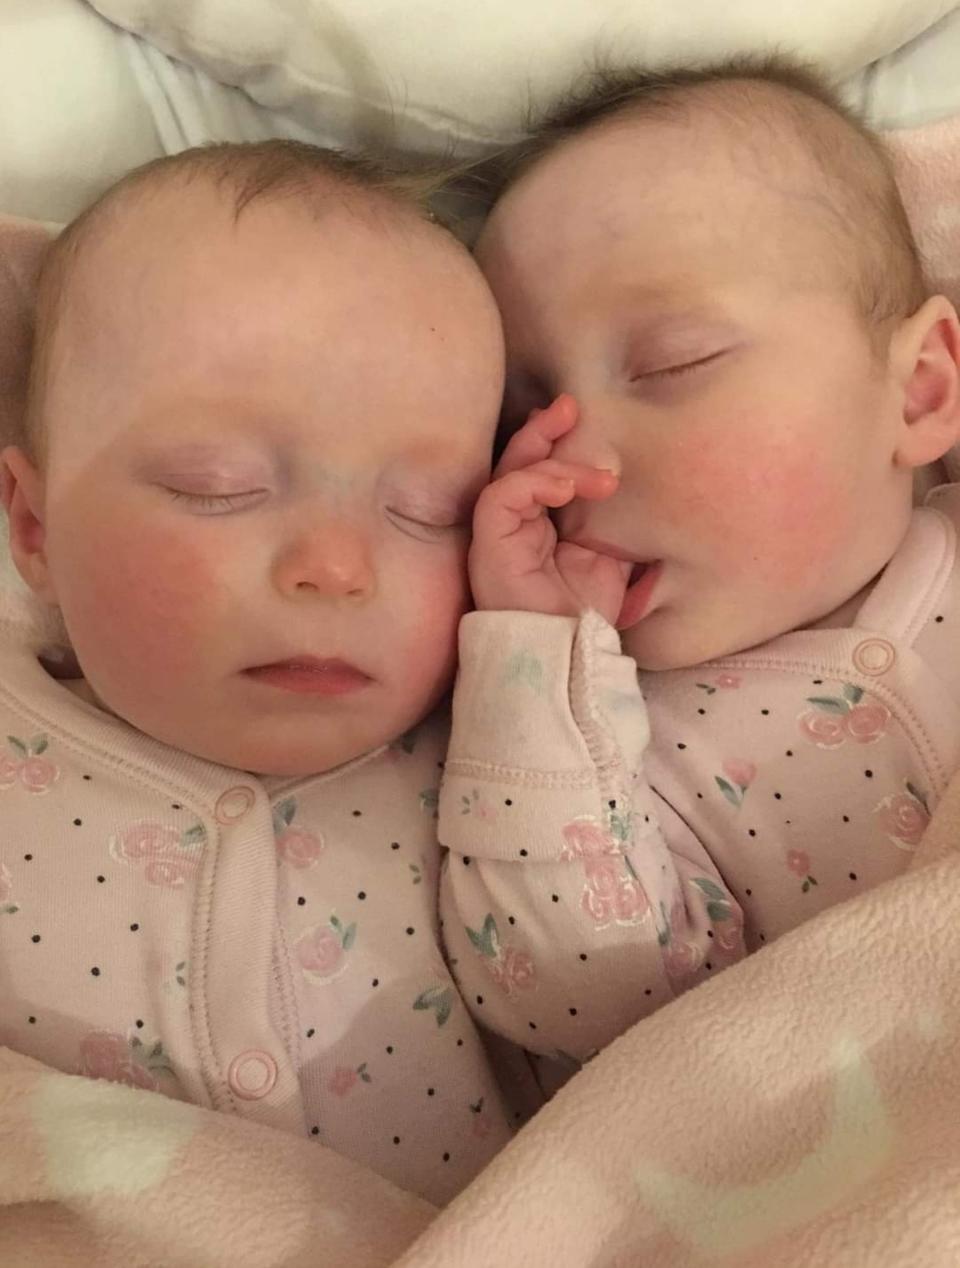 Holly and Darcy were conceived one month apart. (Kennedy News and Media)